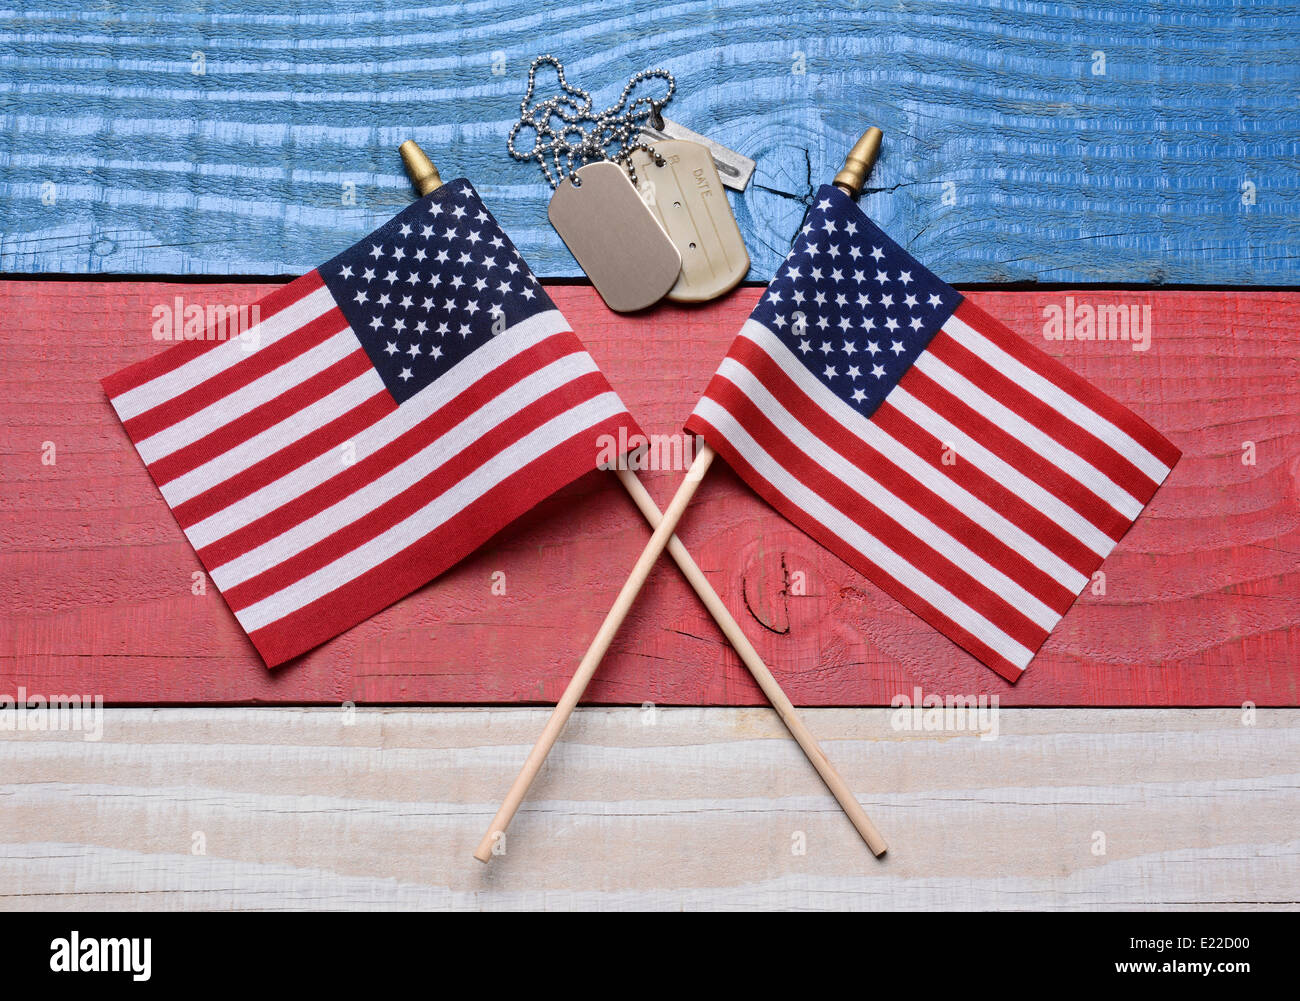 Two crossed American flags on a red, white and blue wood table with military dog tags. Great concept image for the 4th of July, Stock Photo